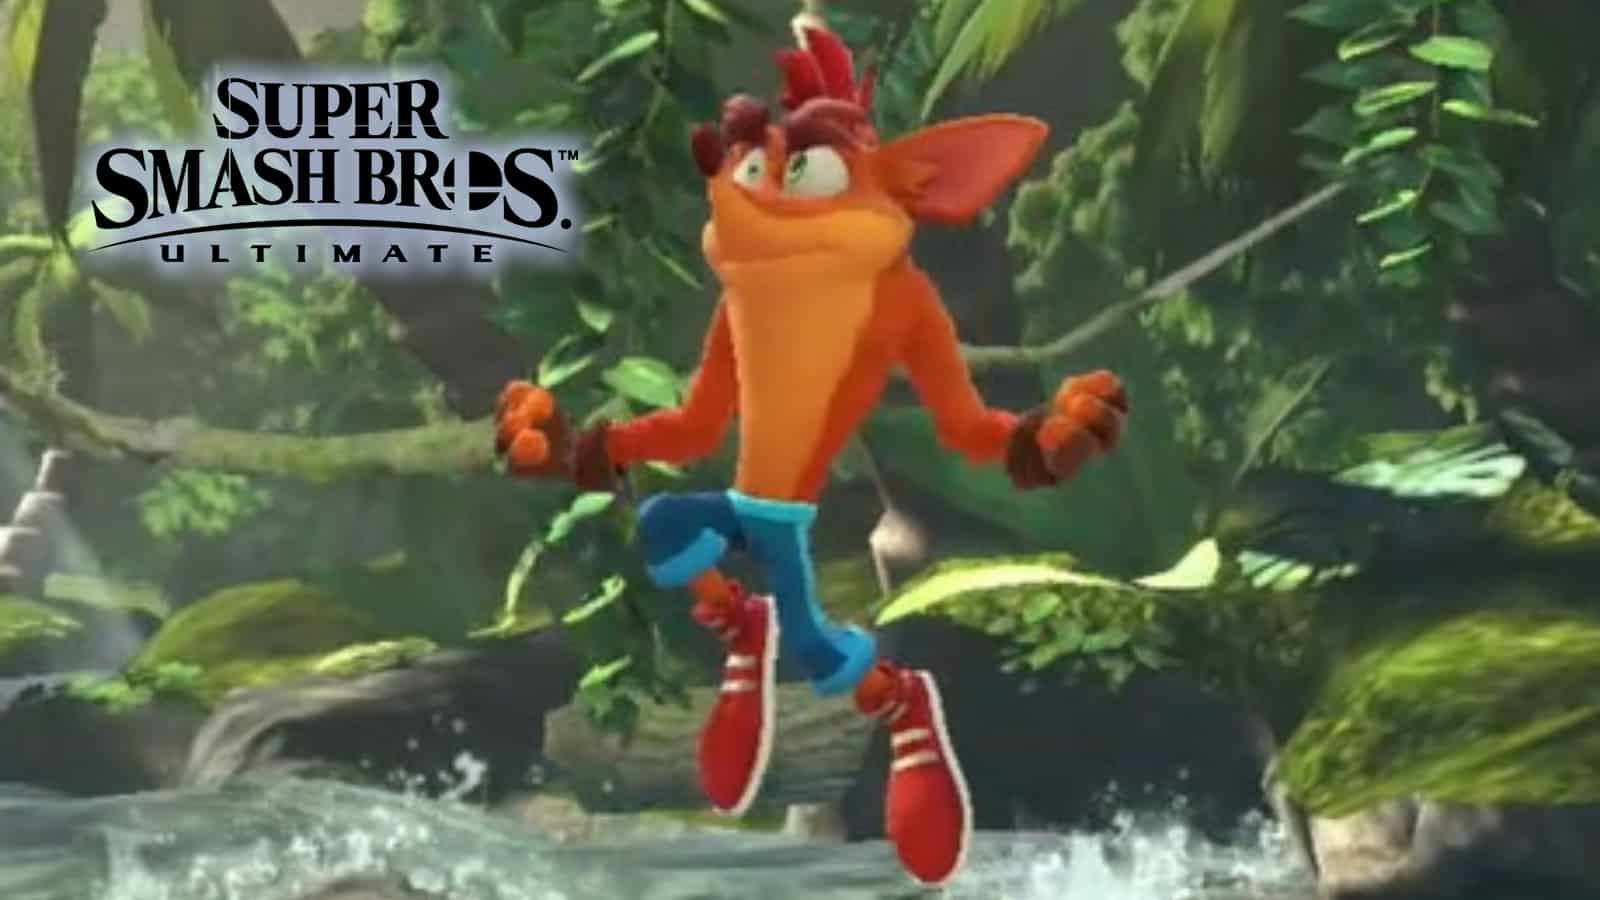 Rumors continue to support Crash Bandicoot coming to Smash